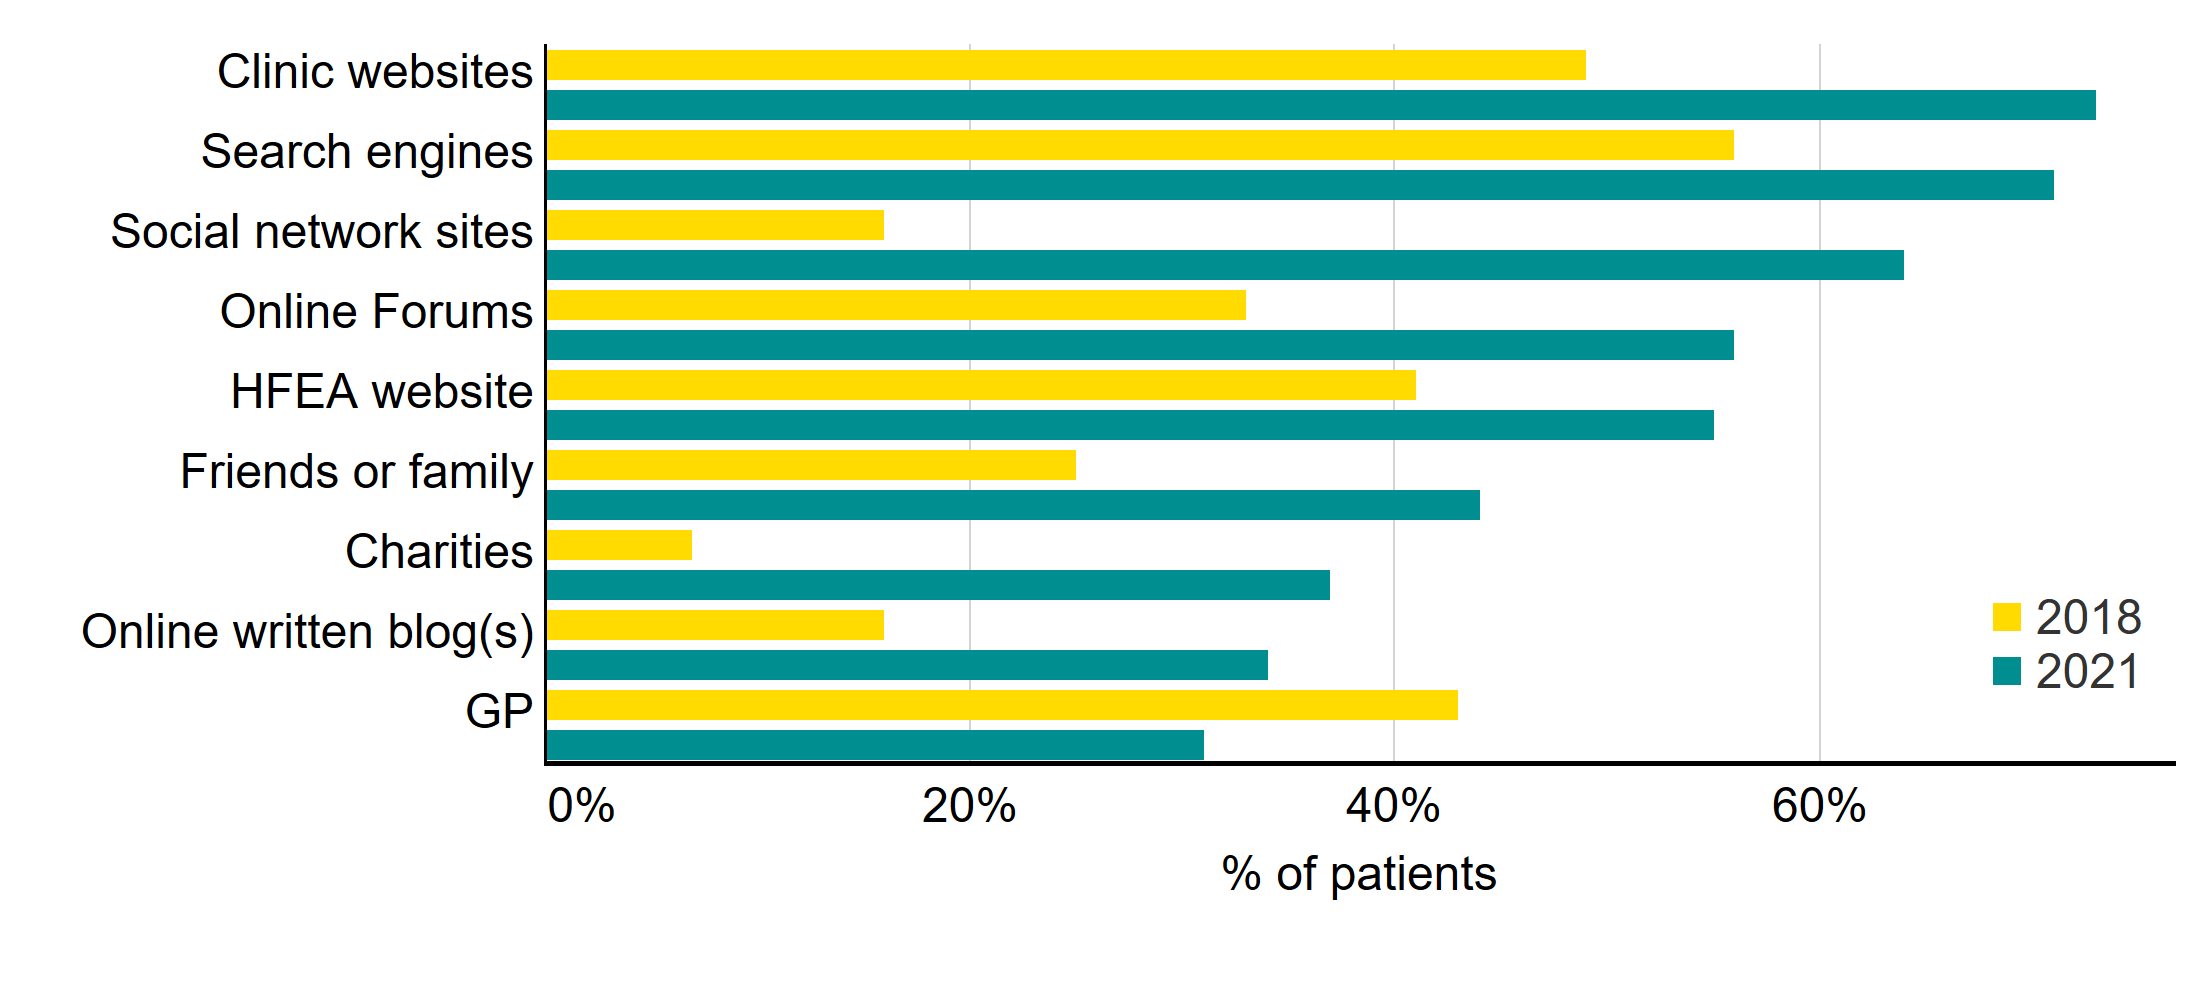 Figure 10: Information/support sources used – 2018 vs. 2021. Information/support sources used – 2018 vs. 2021. This bar chart shows the different information/support sources used, comparing results from the 2018 and 2021 Patient Surveys. Clinic websites, search engines and social network sites were the most common sources of information/support sources in 2021. An accessible form of the underlying data for this figure can be downloaded at the start of the report in .xls format.